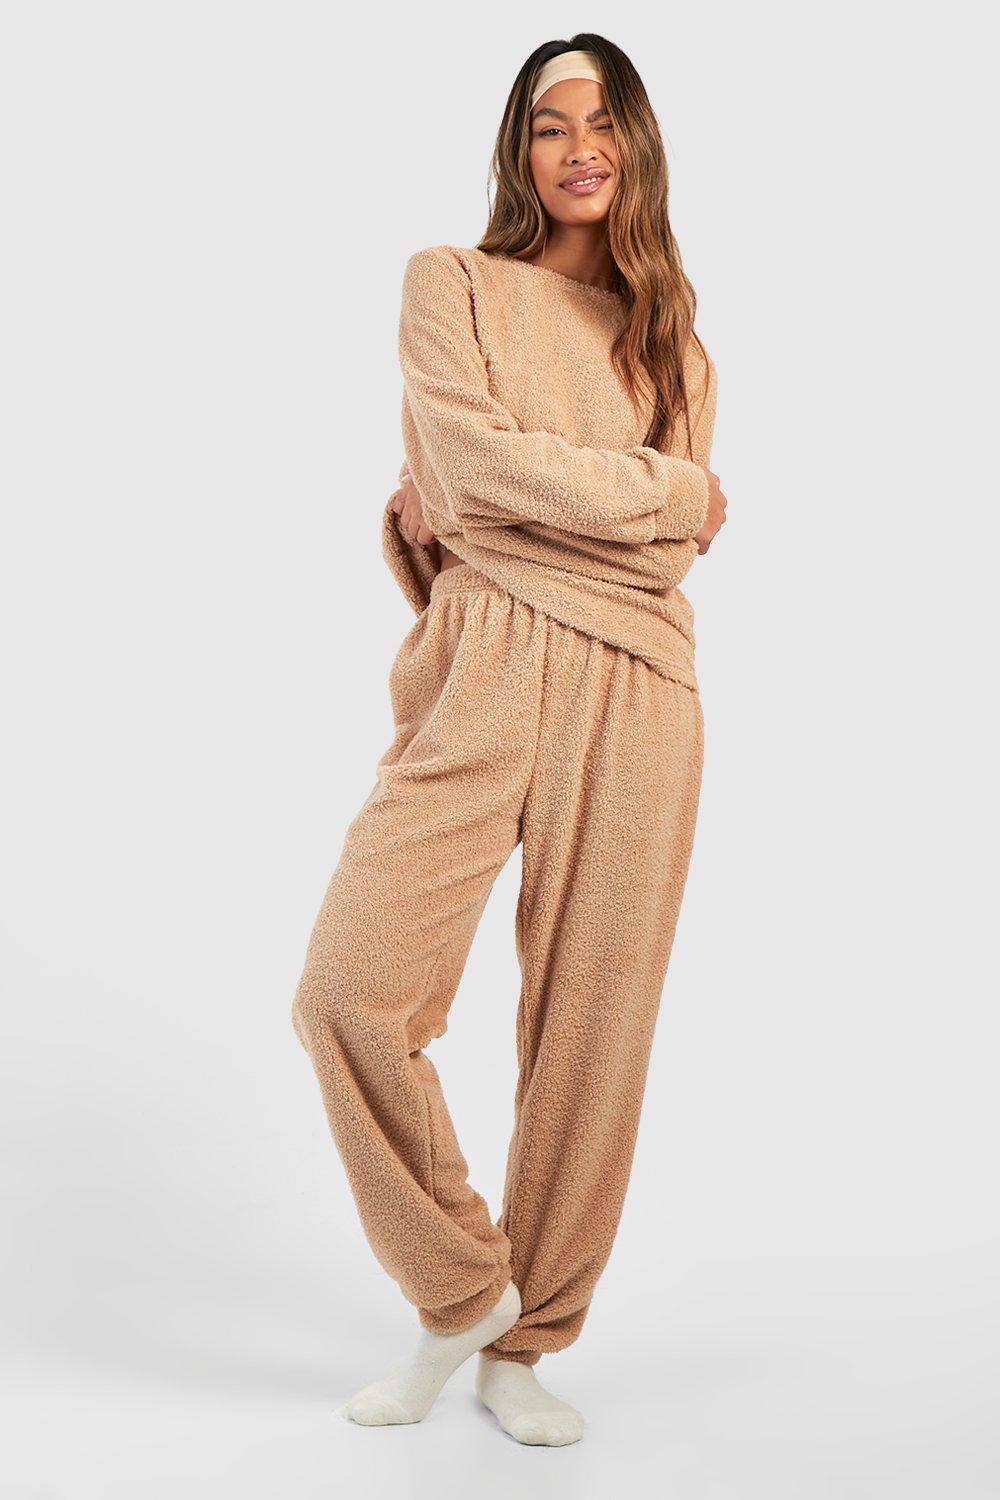 This $41 Matching Loungewear Set Is a Must-have for Travel Days